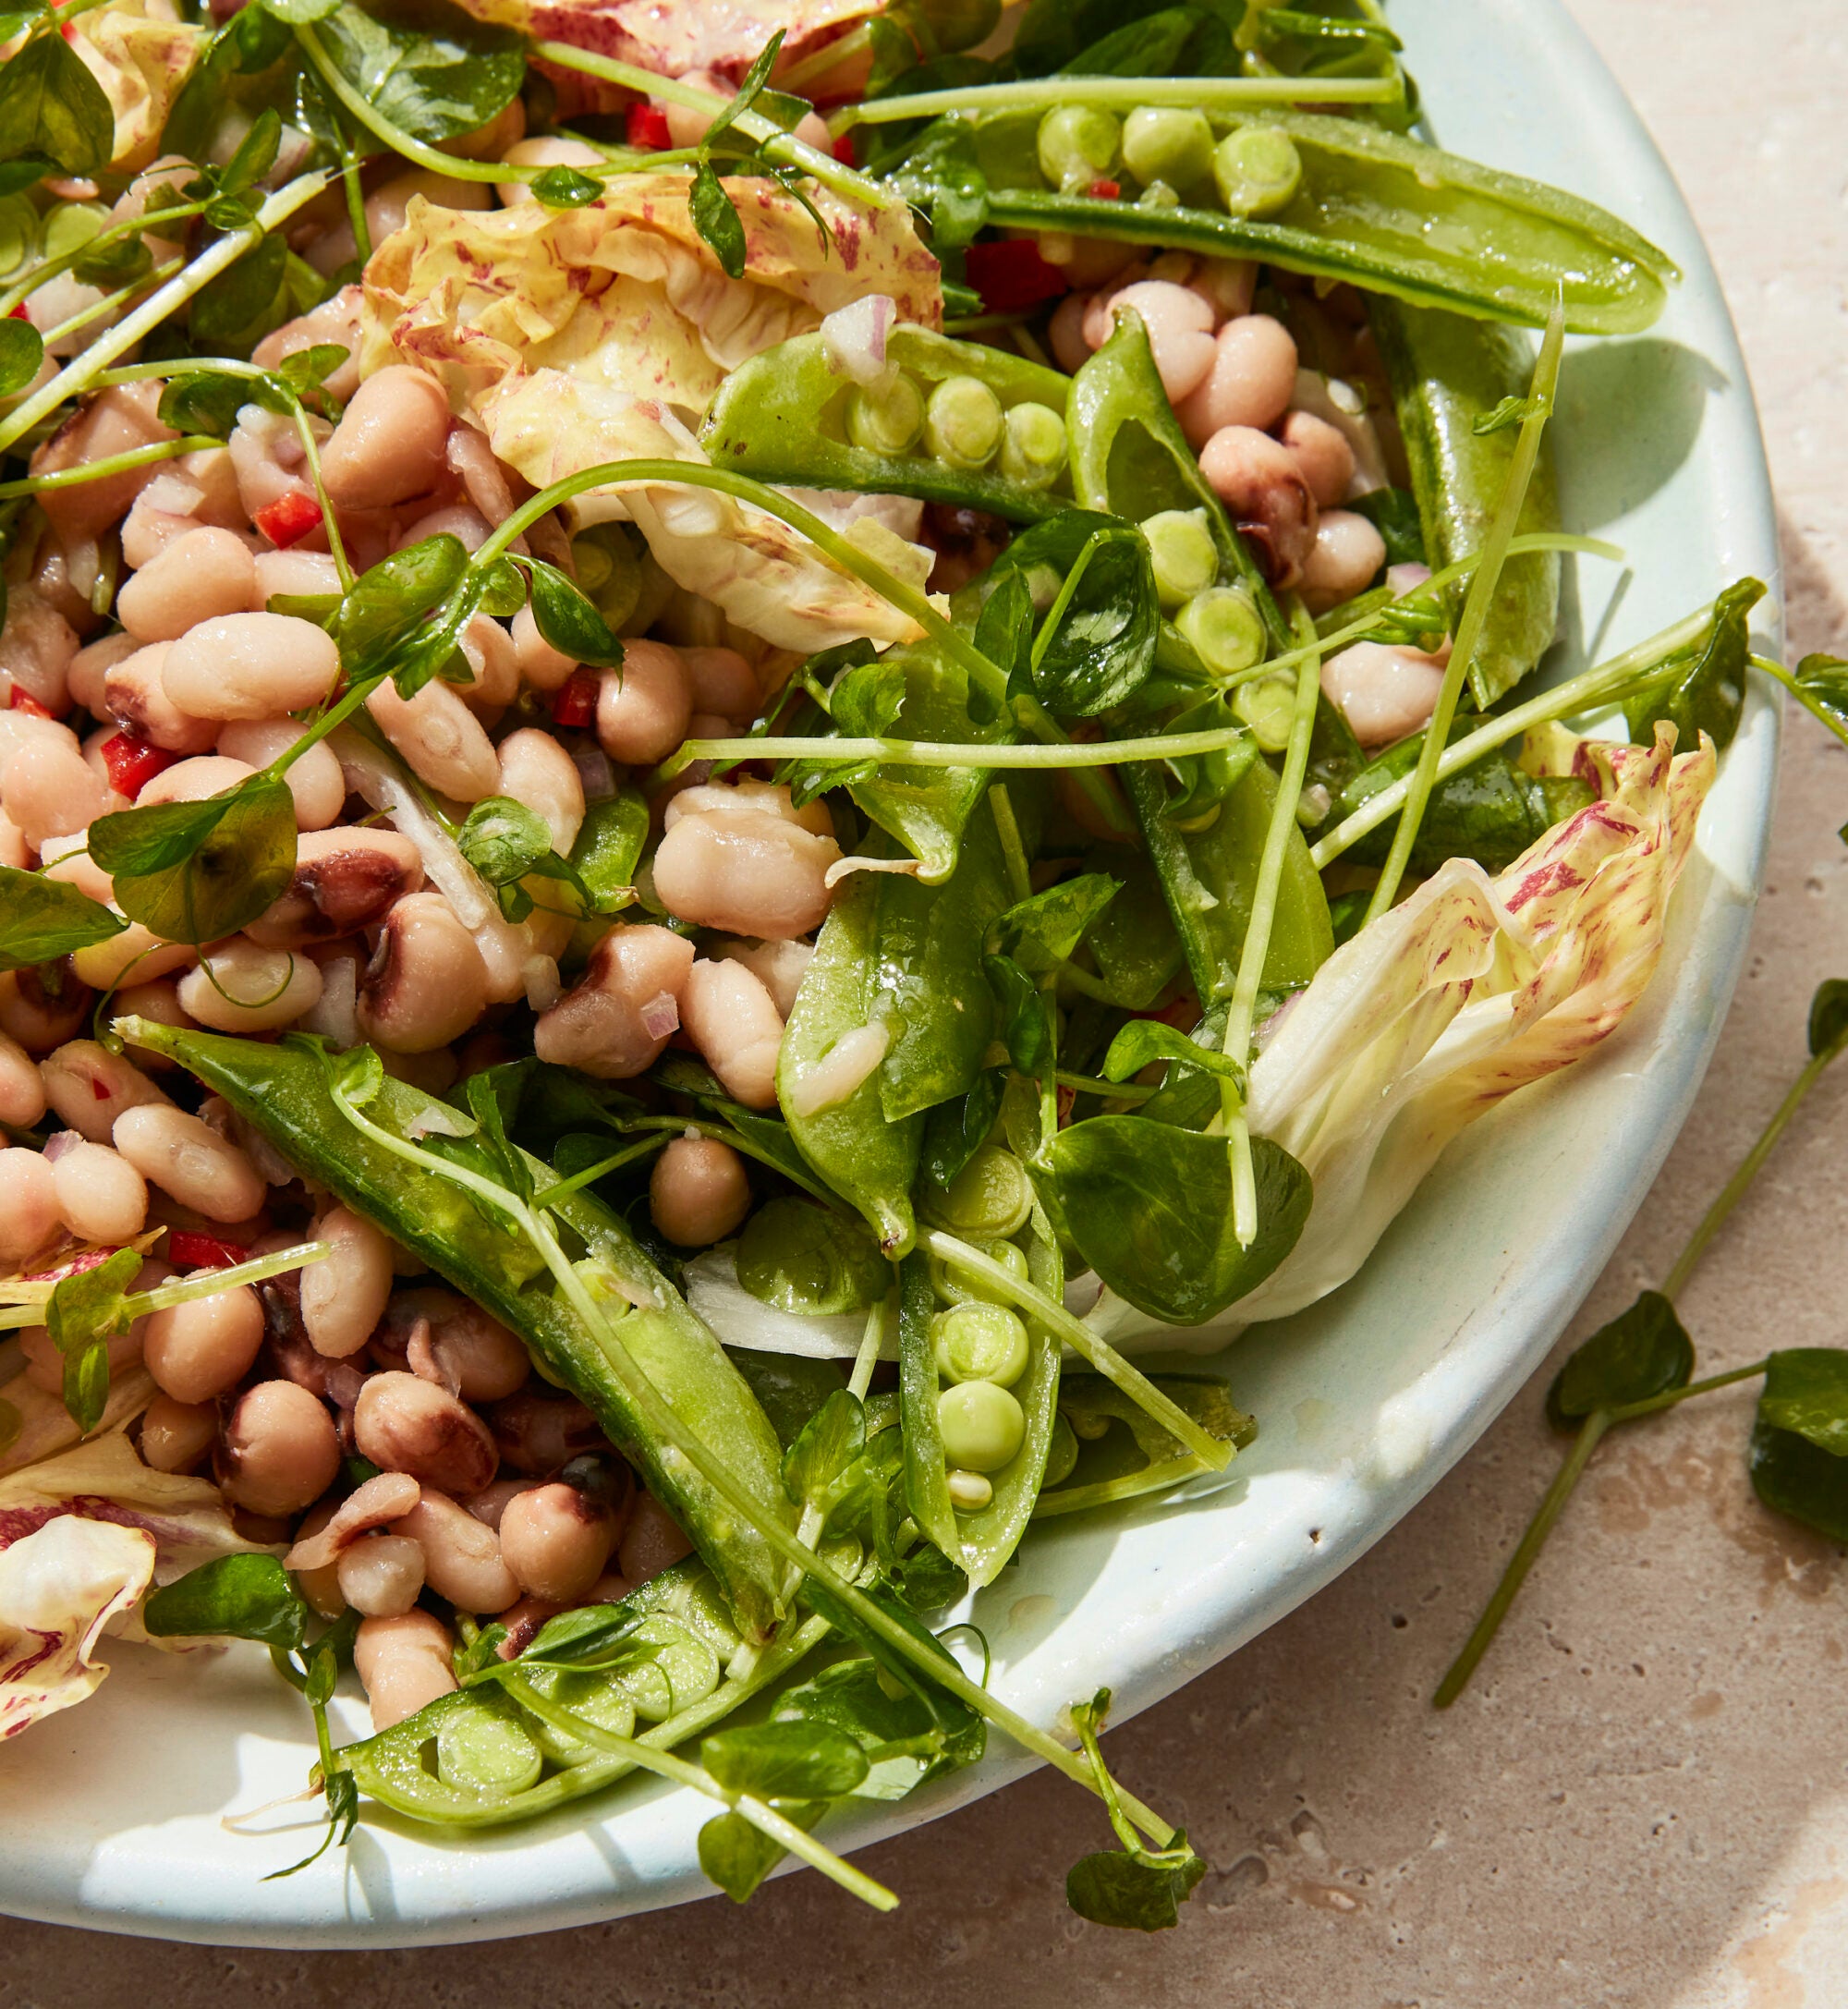 ARTICLE-Marinated-Beans-with-Crunchy-Vegetables_Ali-Slagle_2020-10-06_mark-weinberg